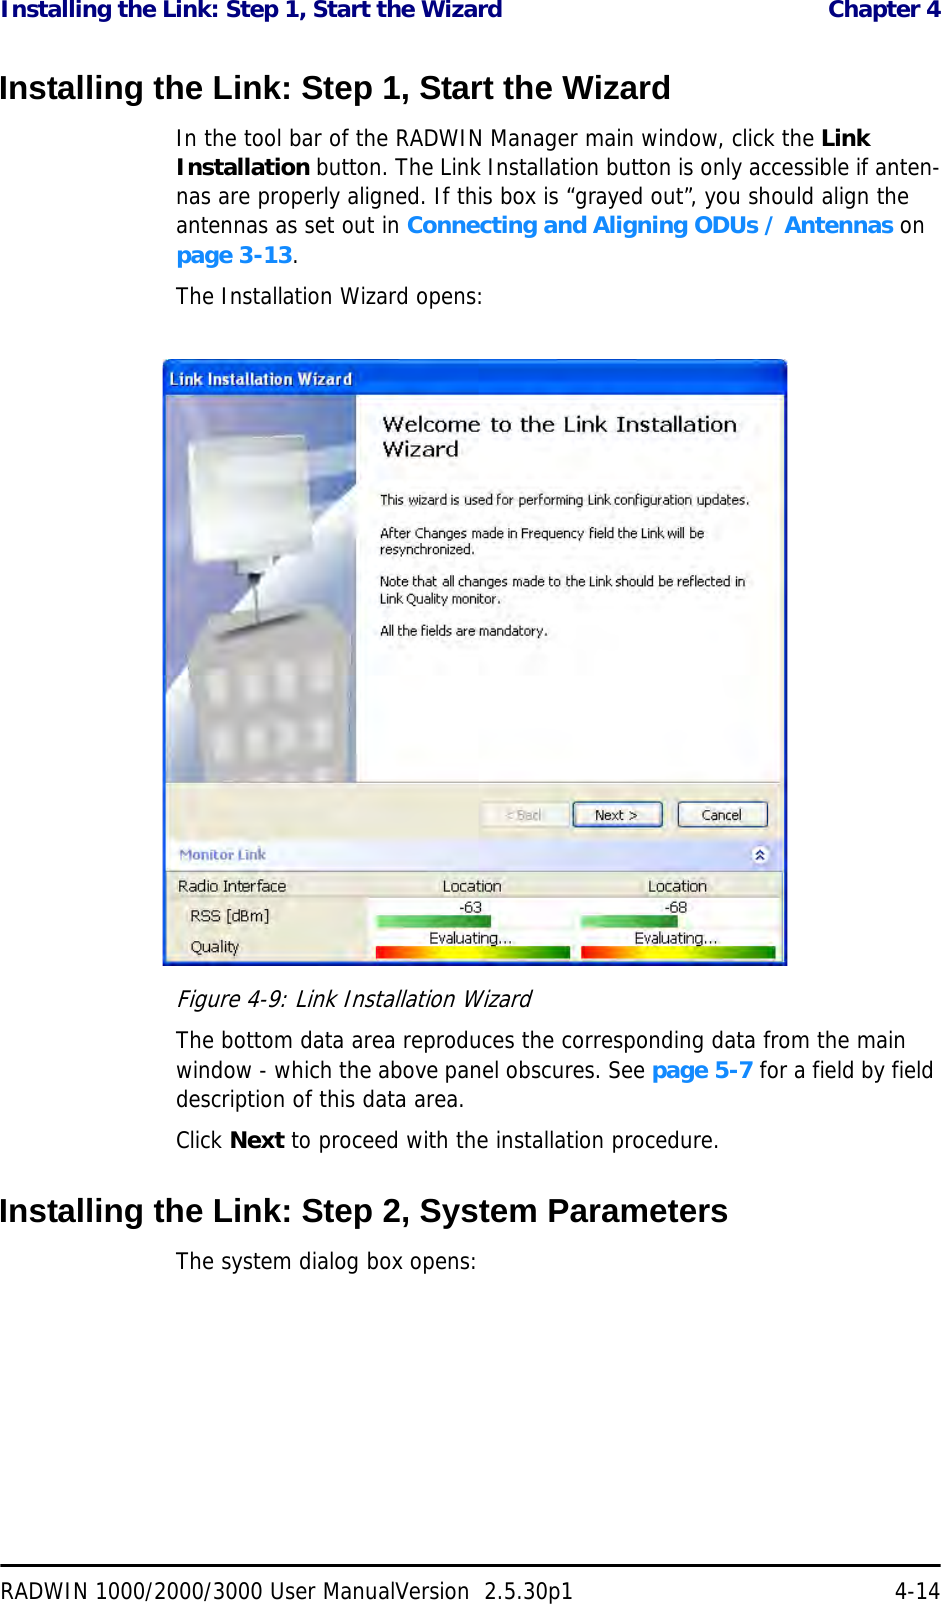 Installing the Link: Step 1, Start the Wizard  Chapter 4RADWIN 1000/2000/3000 User ManualVersion  2.5.30p1 4-14Installing the Link: Step 1, Start the WizardIn the tool bar of the RADWIN Manager main window, click the Link Installation button. The Link Installation button is only accessible if anten-nas are properly aligned. If this box is “grayed out”, you should align the antennas as set out in Connecting and Aligning ODUs / Antennas on page 3-13.The Installation Wizard opens:Figure 4-9: Link Installation WizardThe bottom data area reproduces the corresponding data from the main window - which the above panel obscures. See page 5-7 for a field by field description of this data area.Click Next to proceed with the installation procedure.Installing the Link: Step 2, System ParametersThe system dialog box opens: